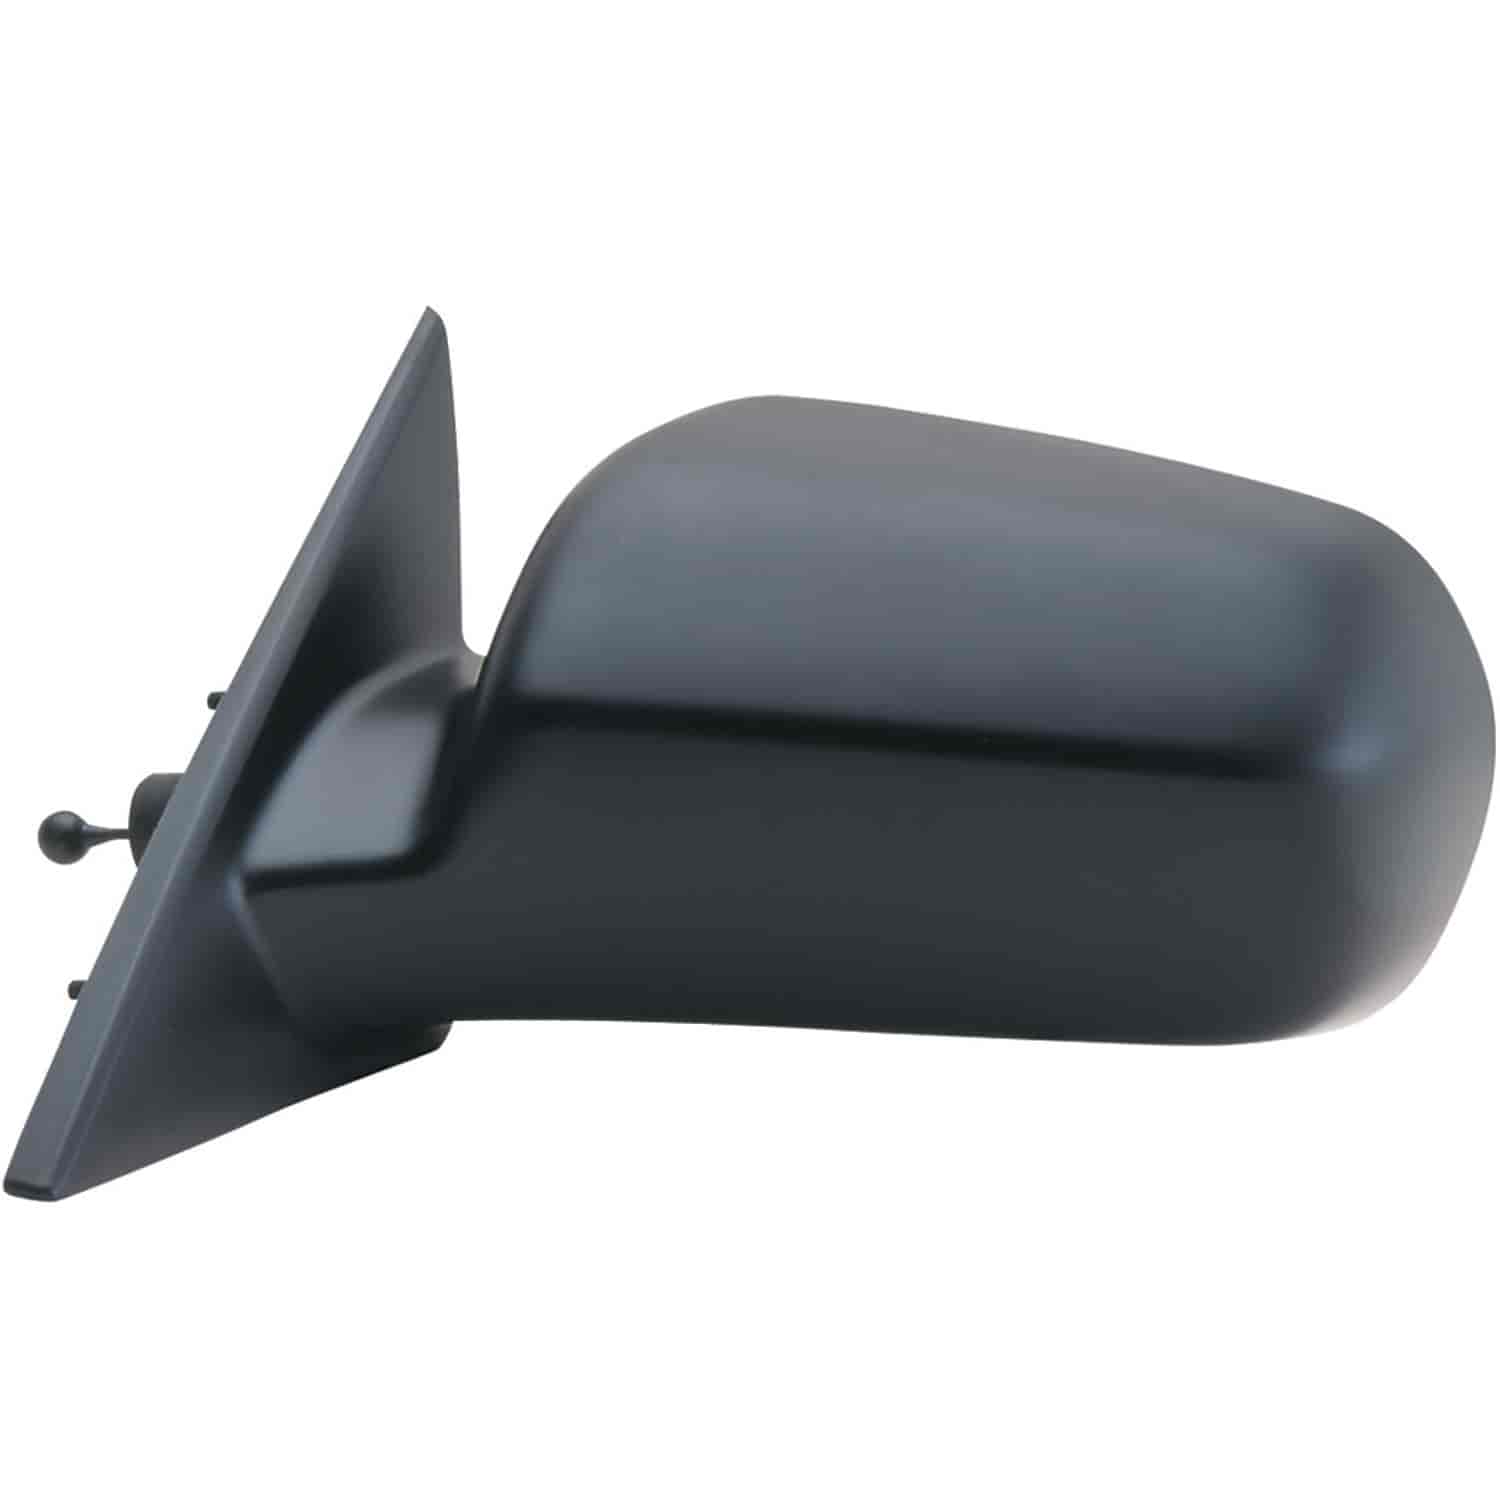 OEM Style Replacement mirror for 98-99 Honda Accord Sedan driver side mirror tested to fit and funct